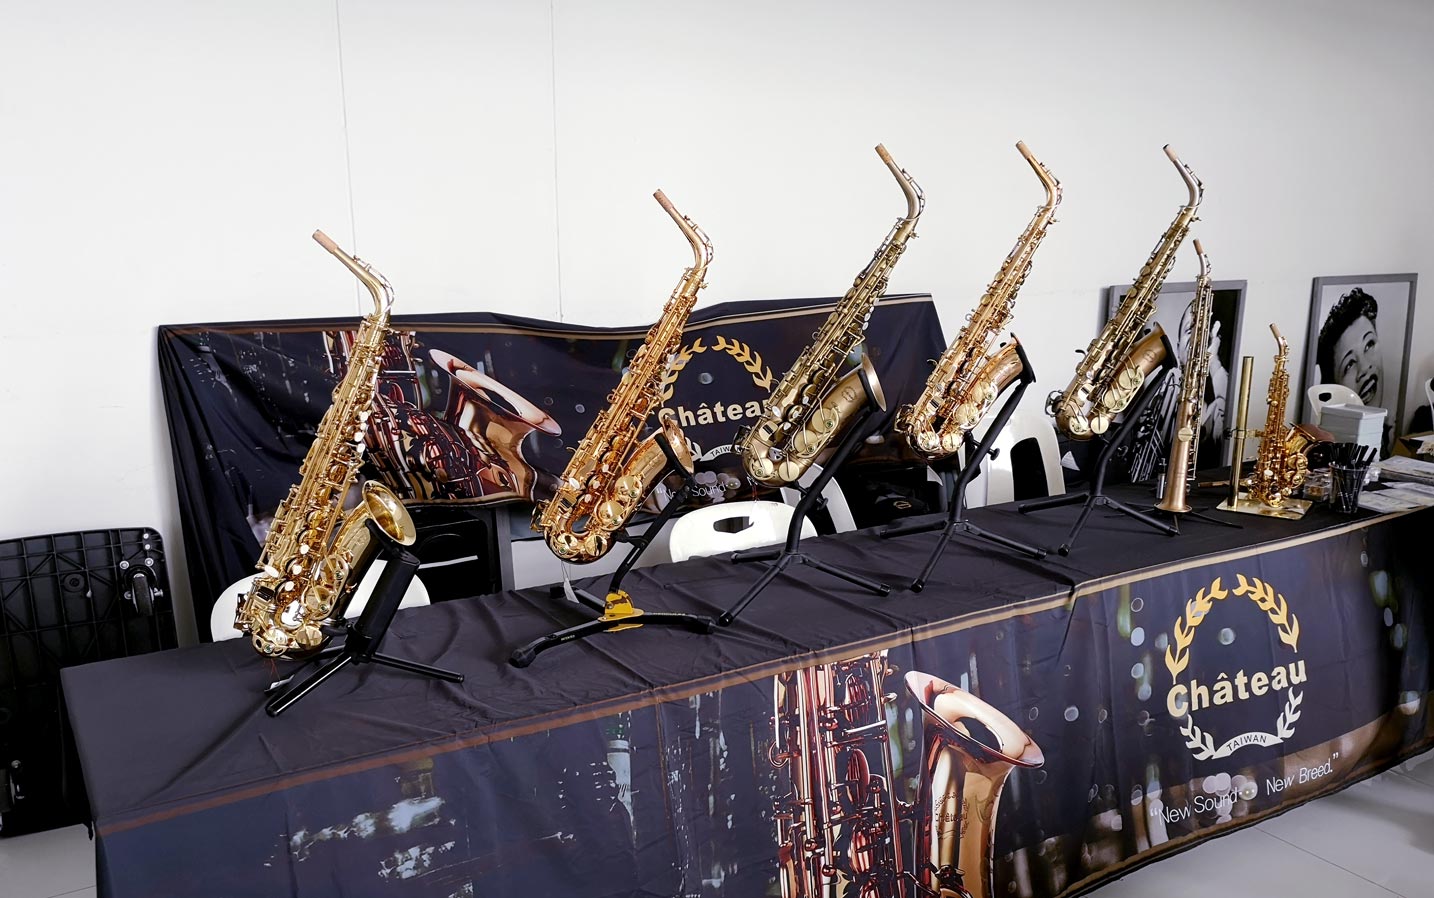 Chateau exhibit saxophones in the apsa event which held in the Thailand.